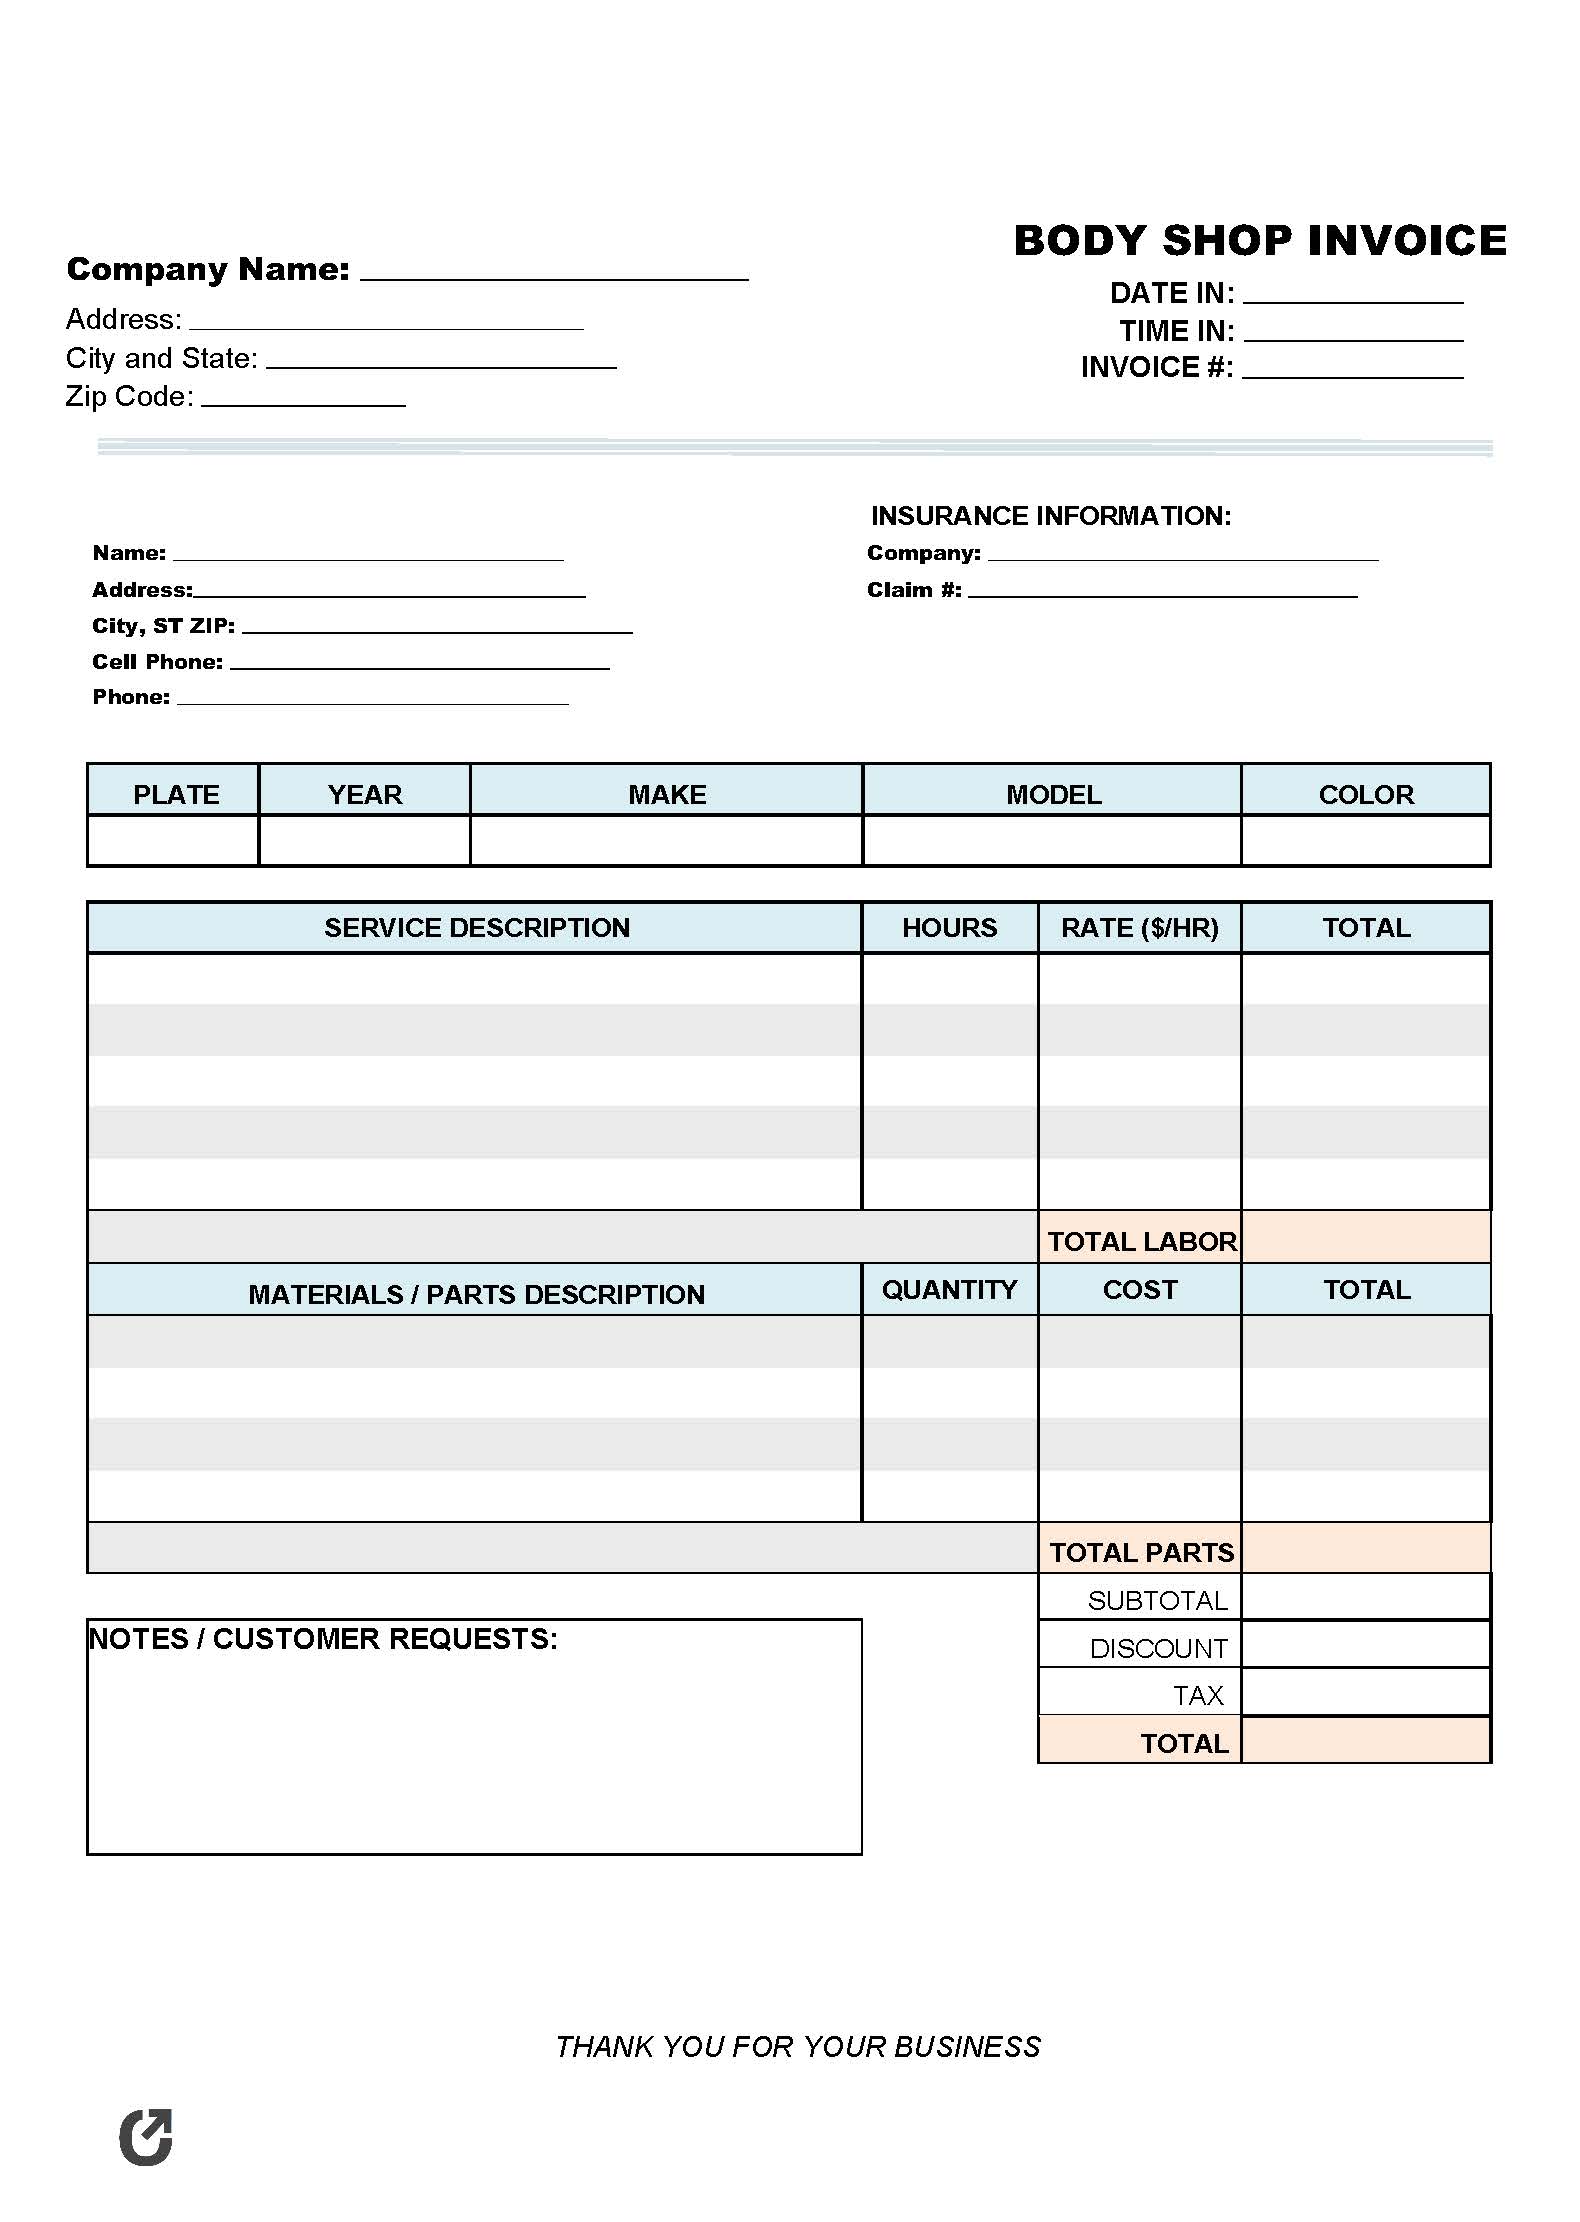 Auto Detailing Invoice Template from opendocs.com